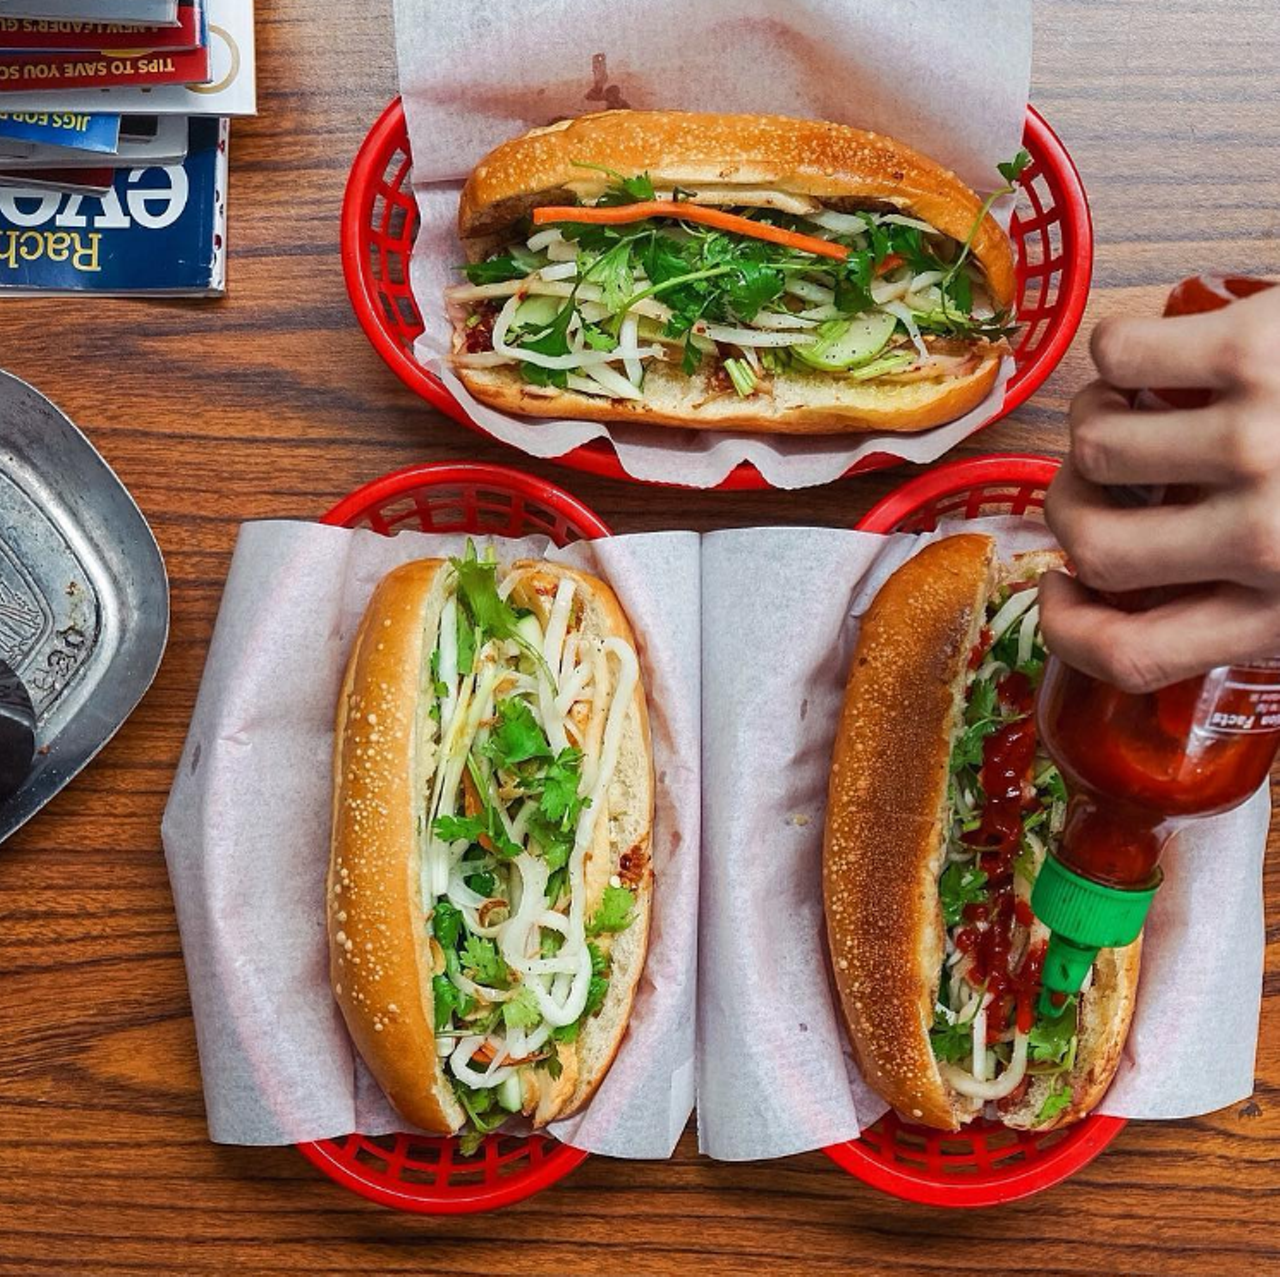 Banh Mi Nha Trang Subs
1216 E. Colonial Drive | 407-346-4549
The subs at Banh Mi Nha Trang are as authentic as it gets with 22 different banh mi. We recommend giving the pork liver p&acirc;t&eacute; and Vietnamese ham subs a try if it's your first time checking this staple out.
Photo via mira.bi/Instagram